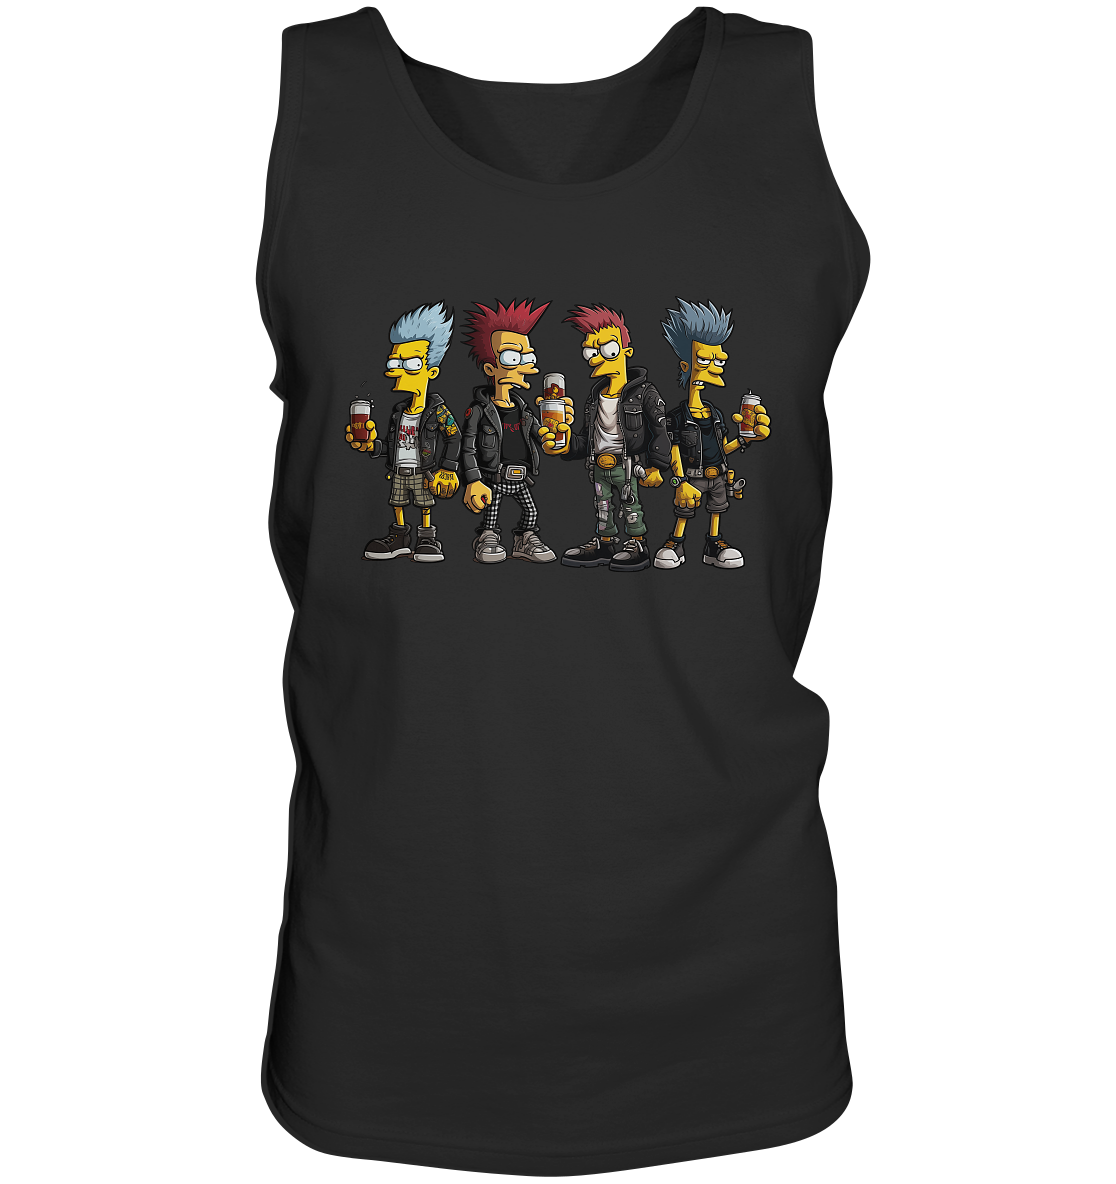 We Are The Drinking Class III - Tank-Top